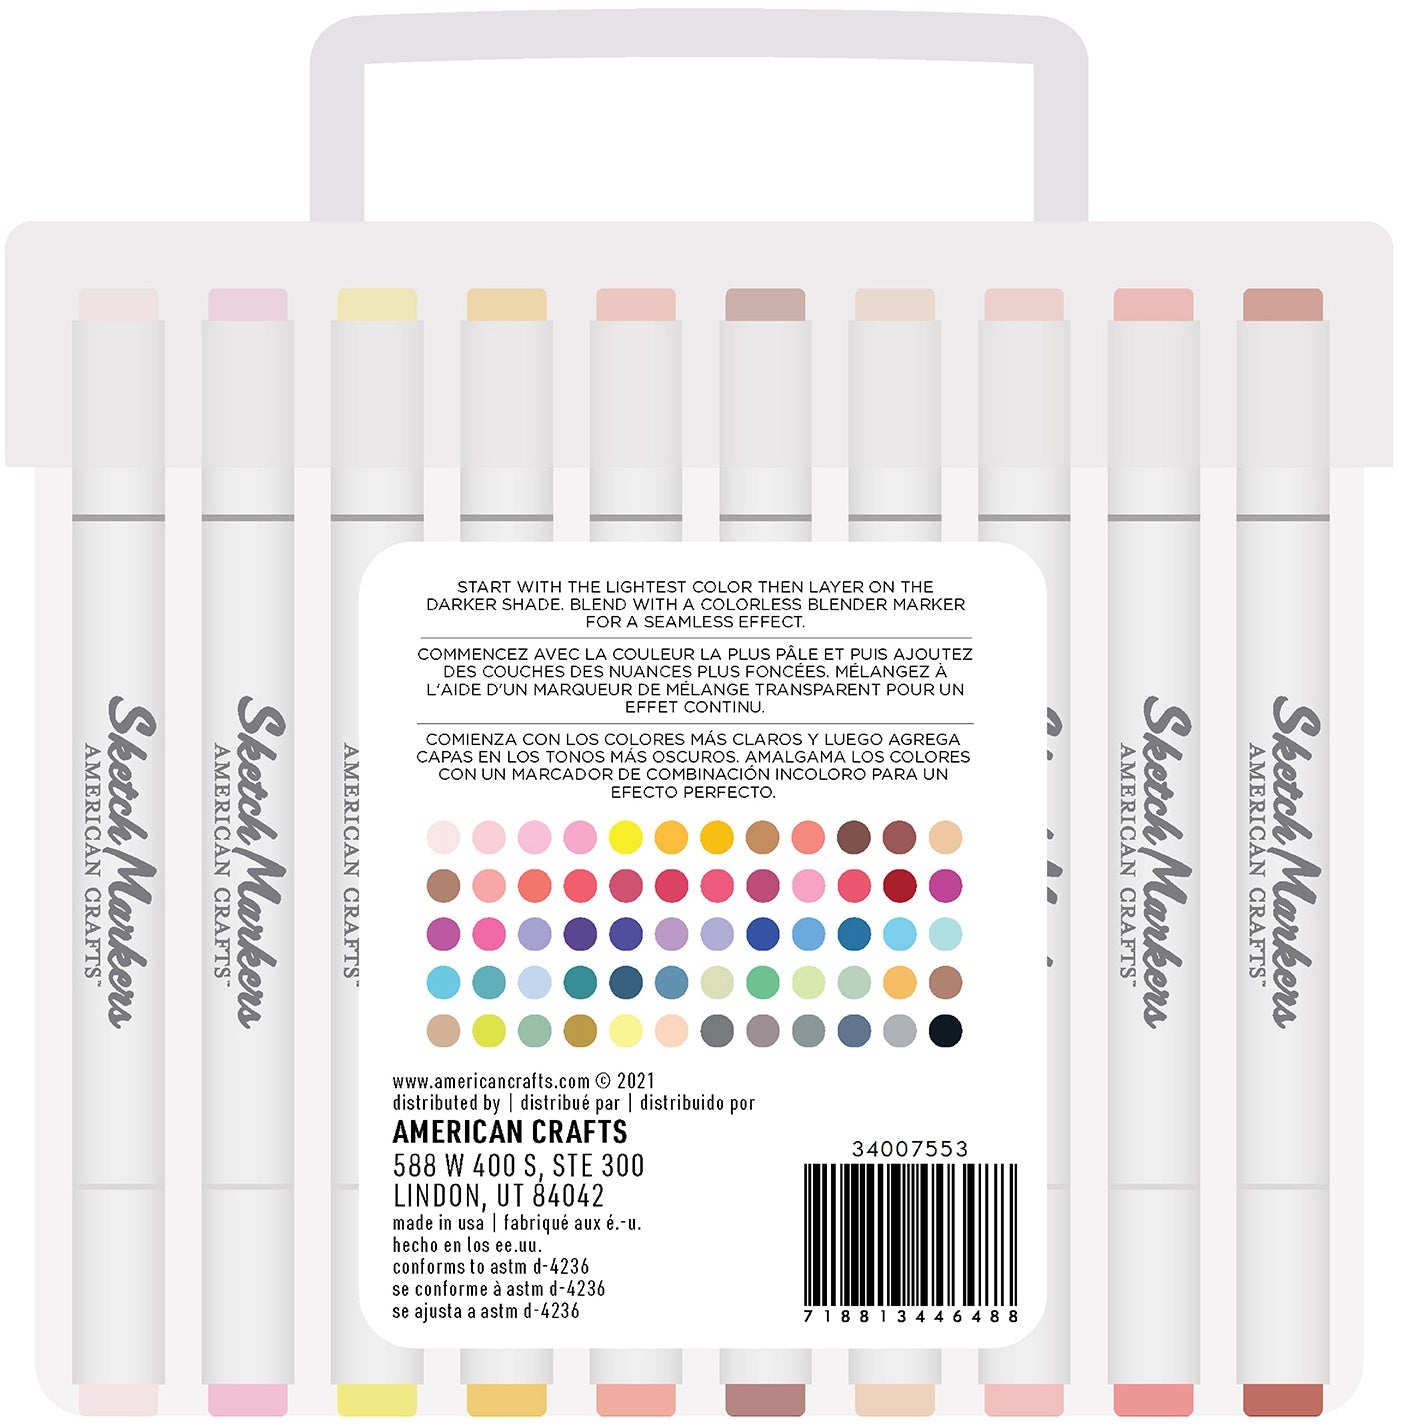 American Crafts Dual-Tip 48 Sketch Markers and 3 Colorless